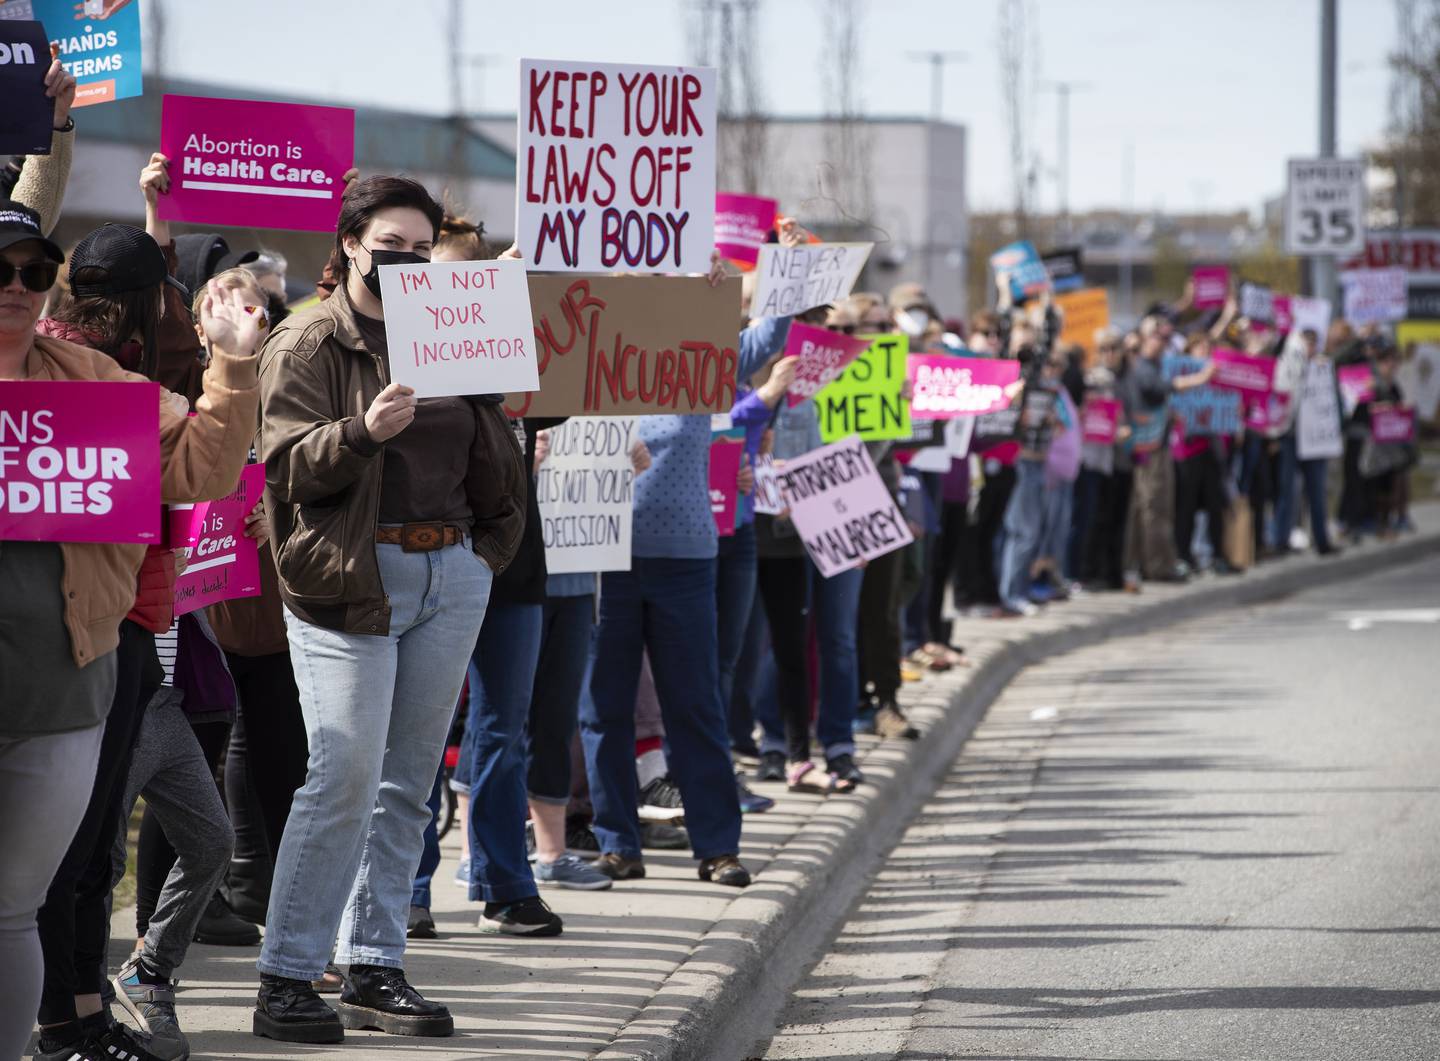 planned parenthood, roe v wade, abortion, women’s rights, women’s health care, rally, protest